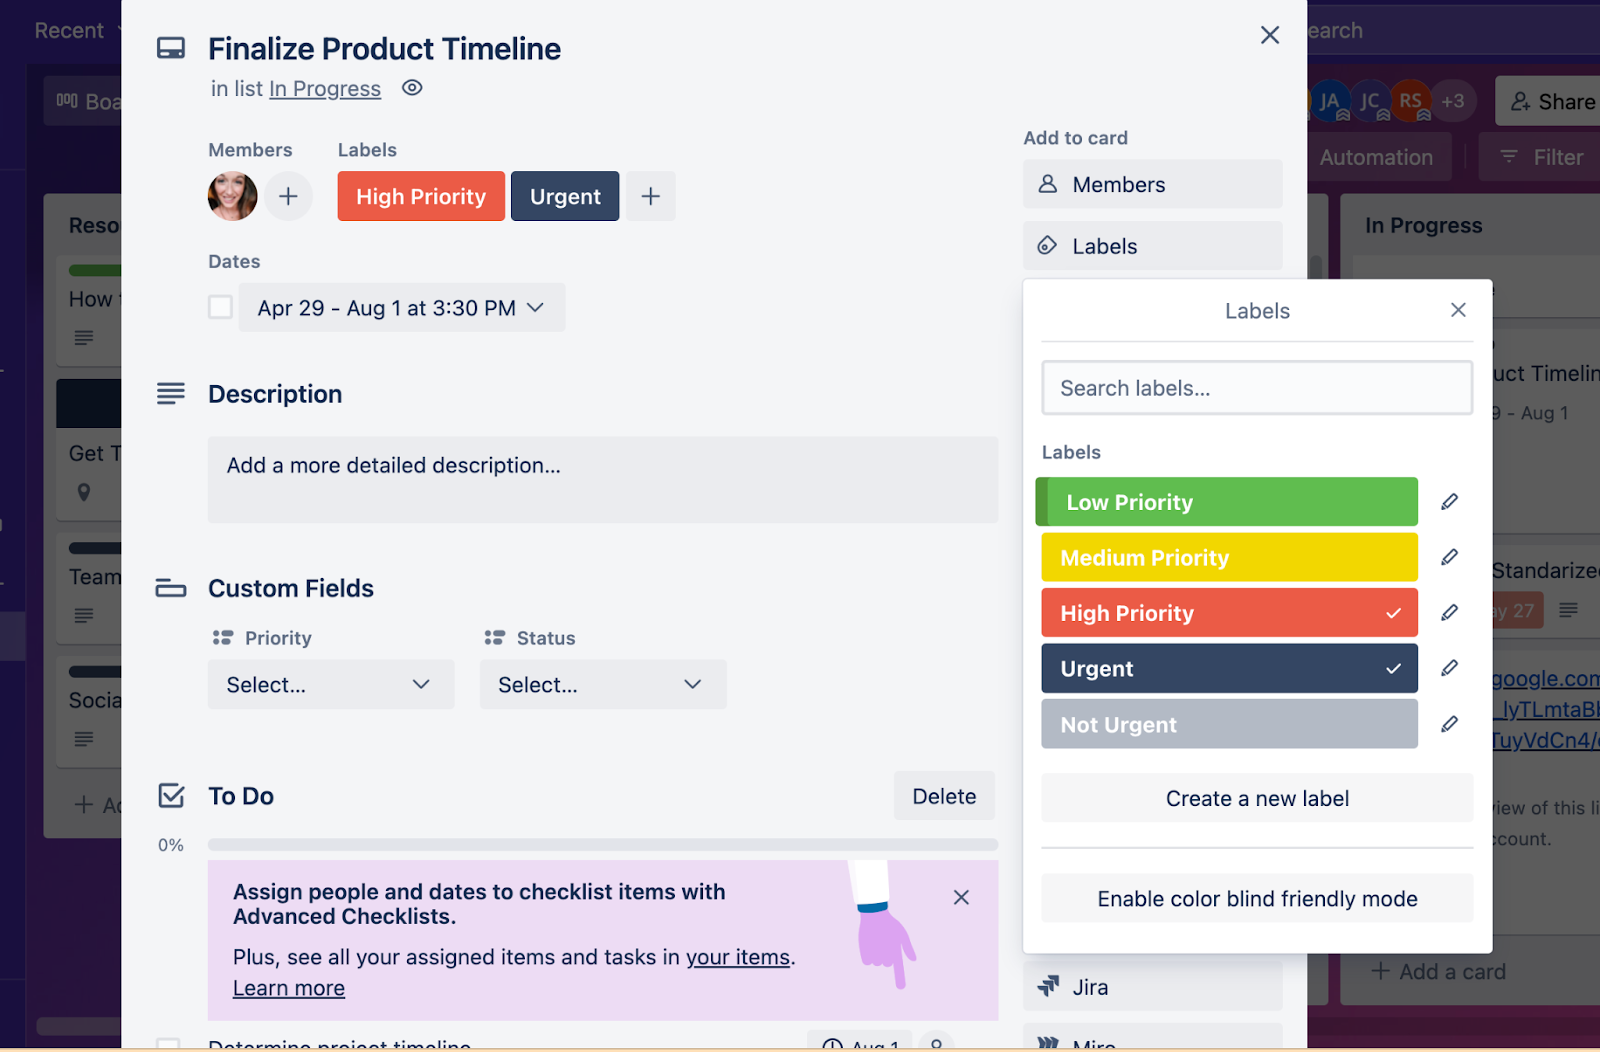 Picture of a Trello card being tagged with custom labels to indicate priority level